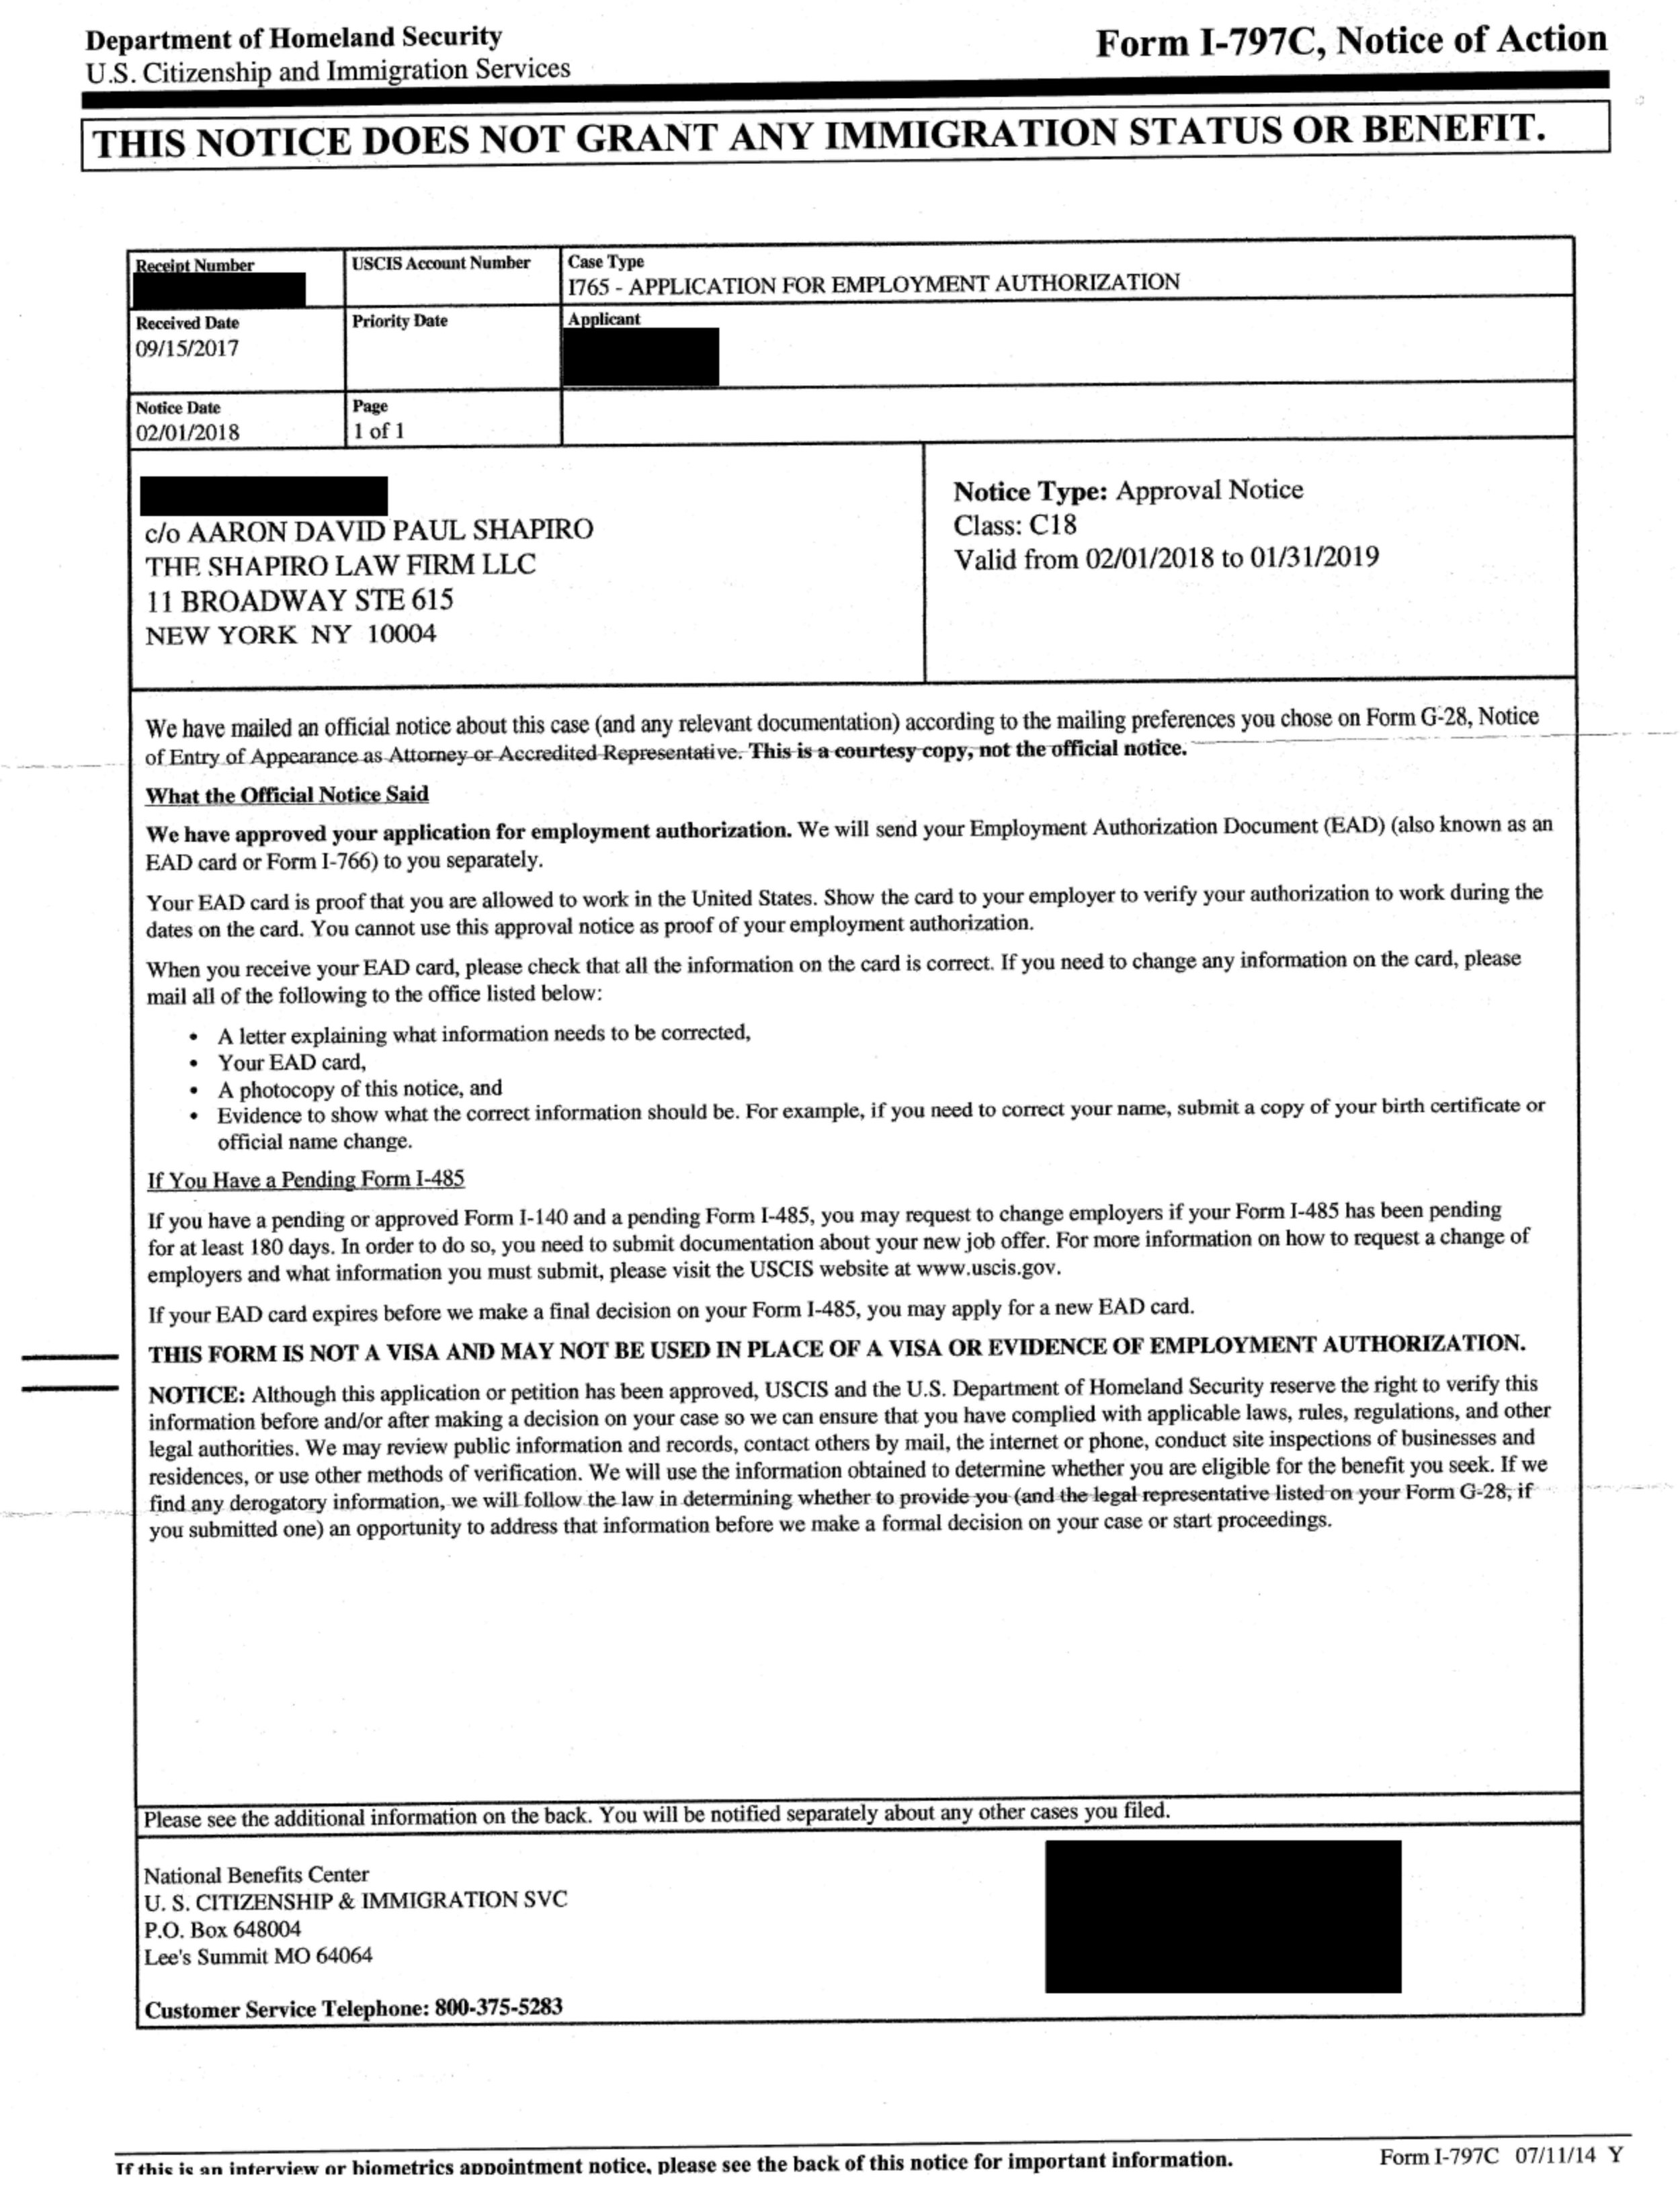 Form I-797C, Notice of Action - I-765 Approval Notice